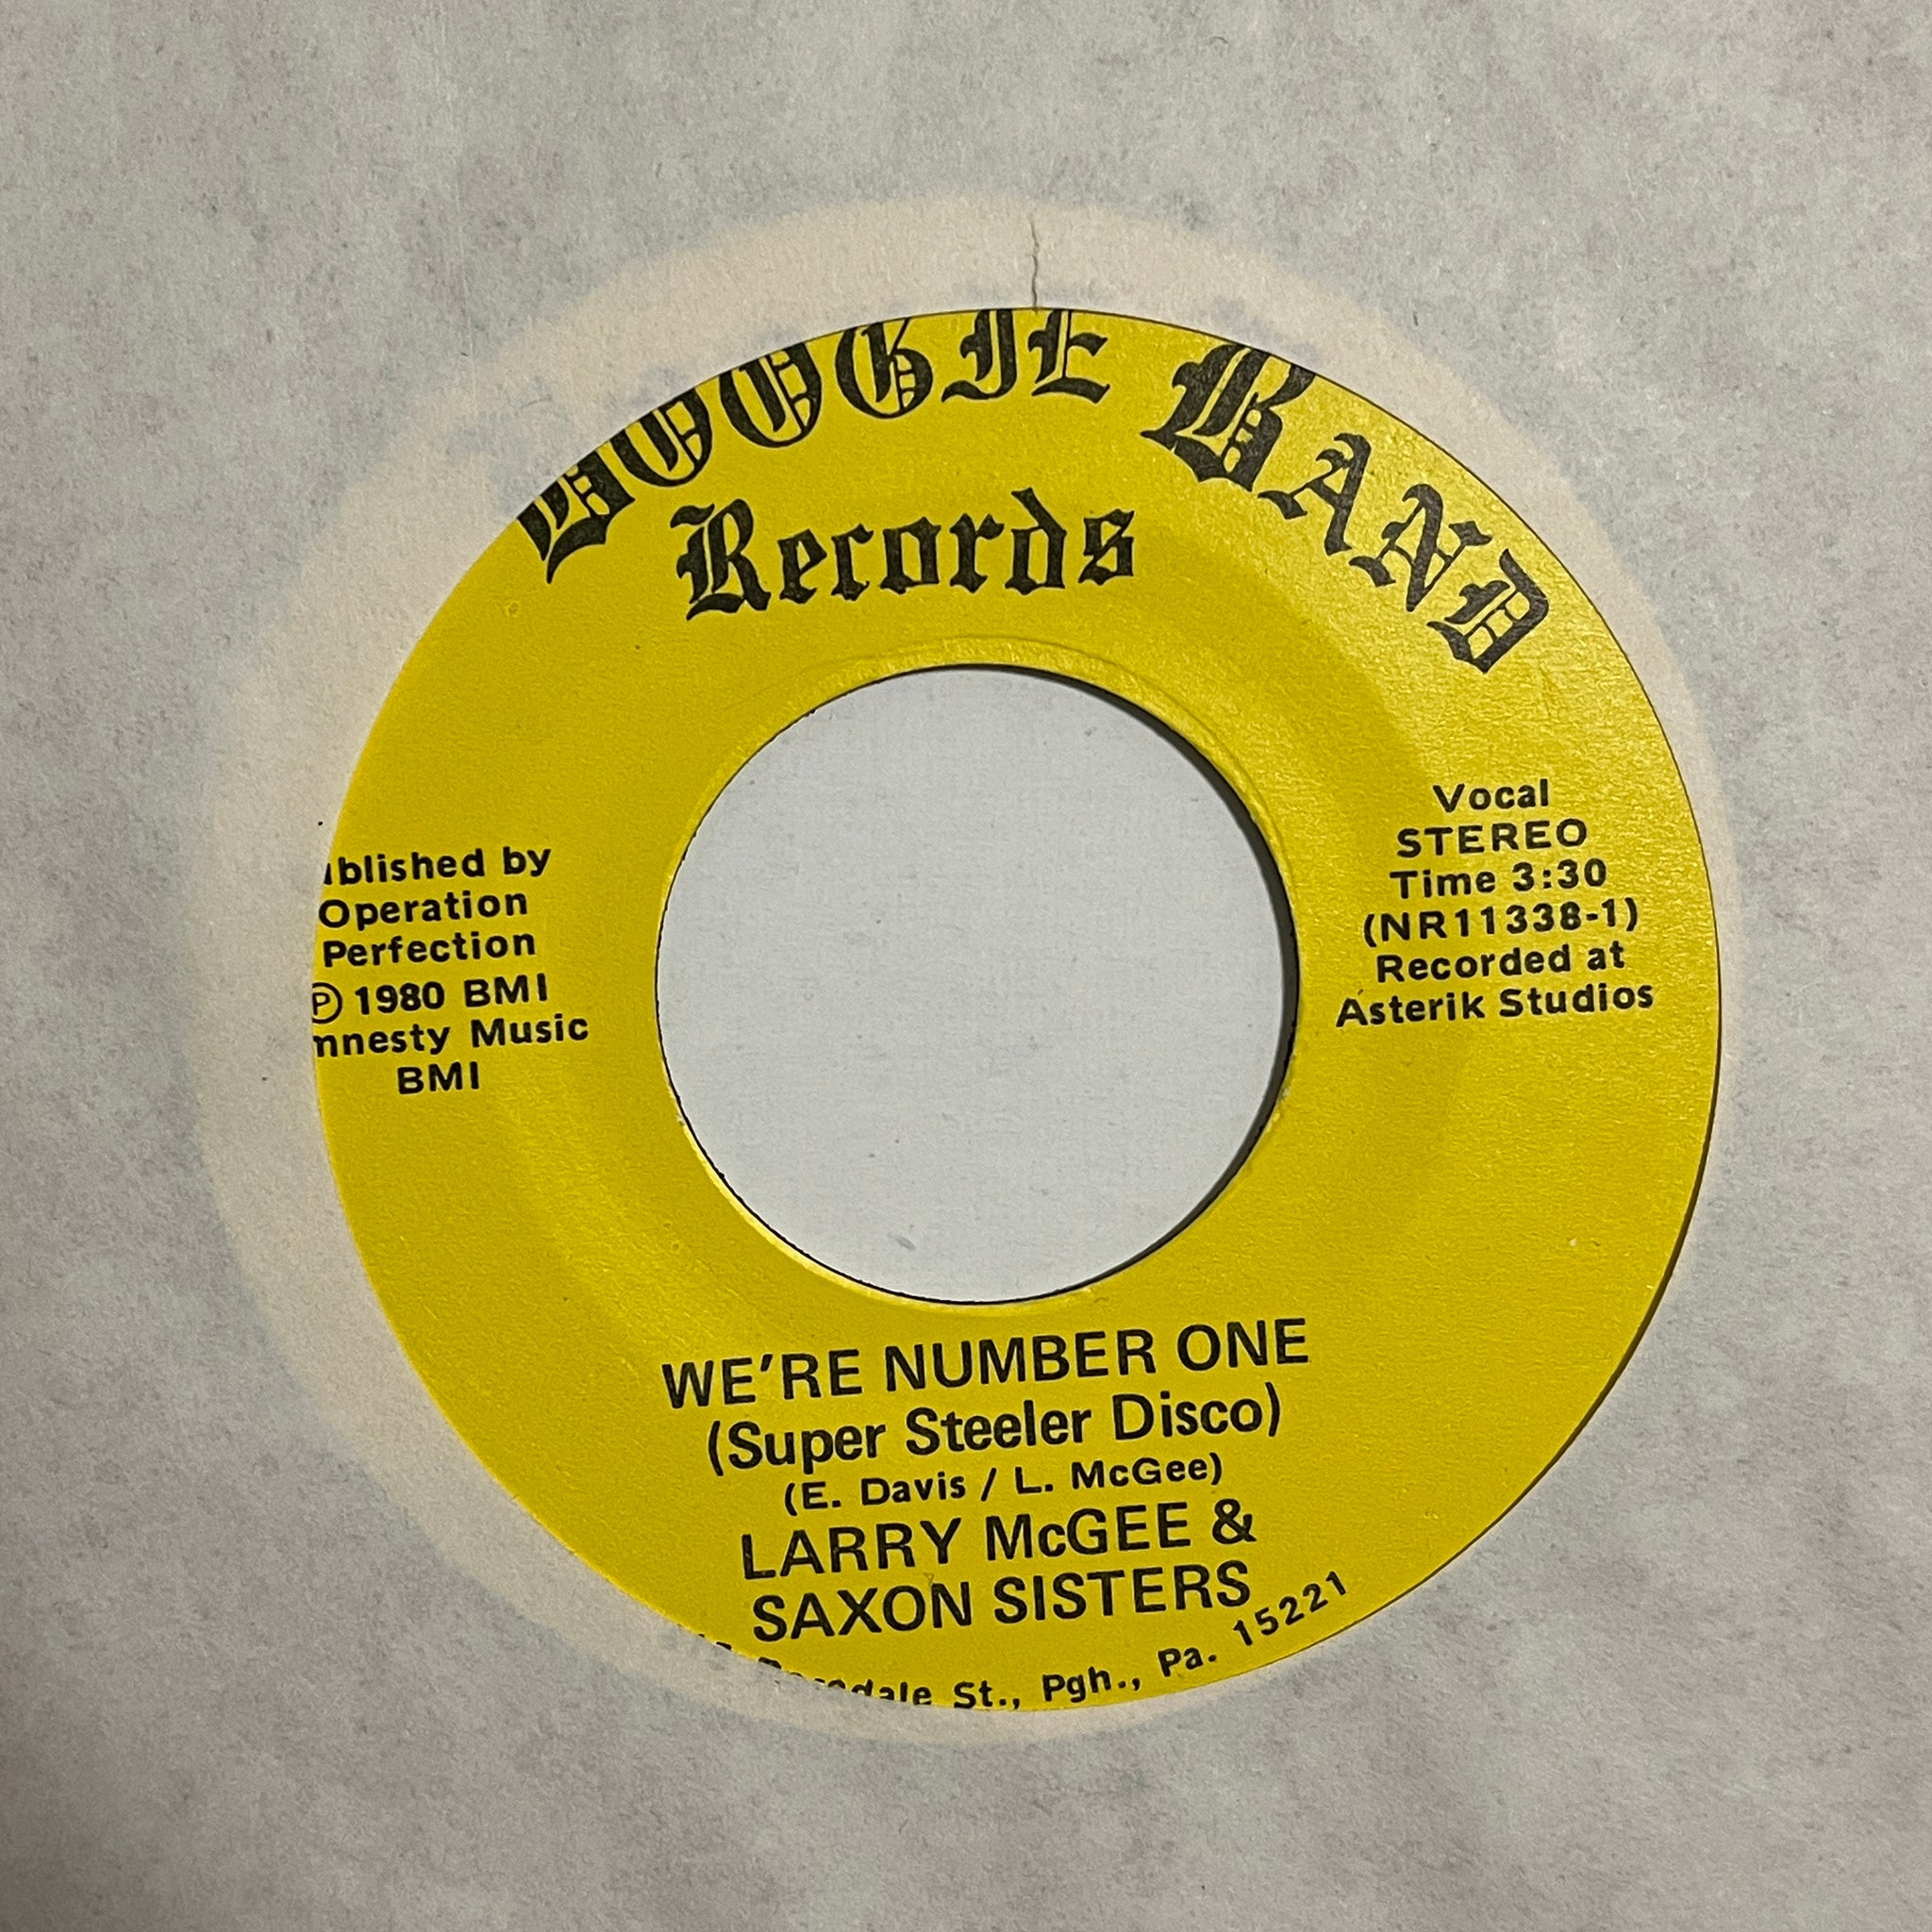 Larry McGee & Saxon Sisters – We're Number One (Super Steeler Disco)